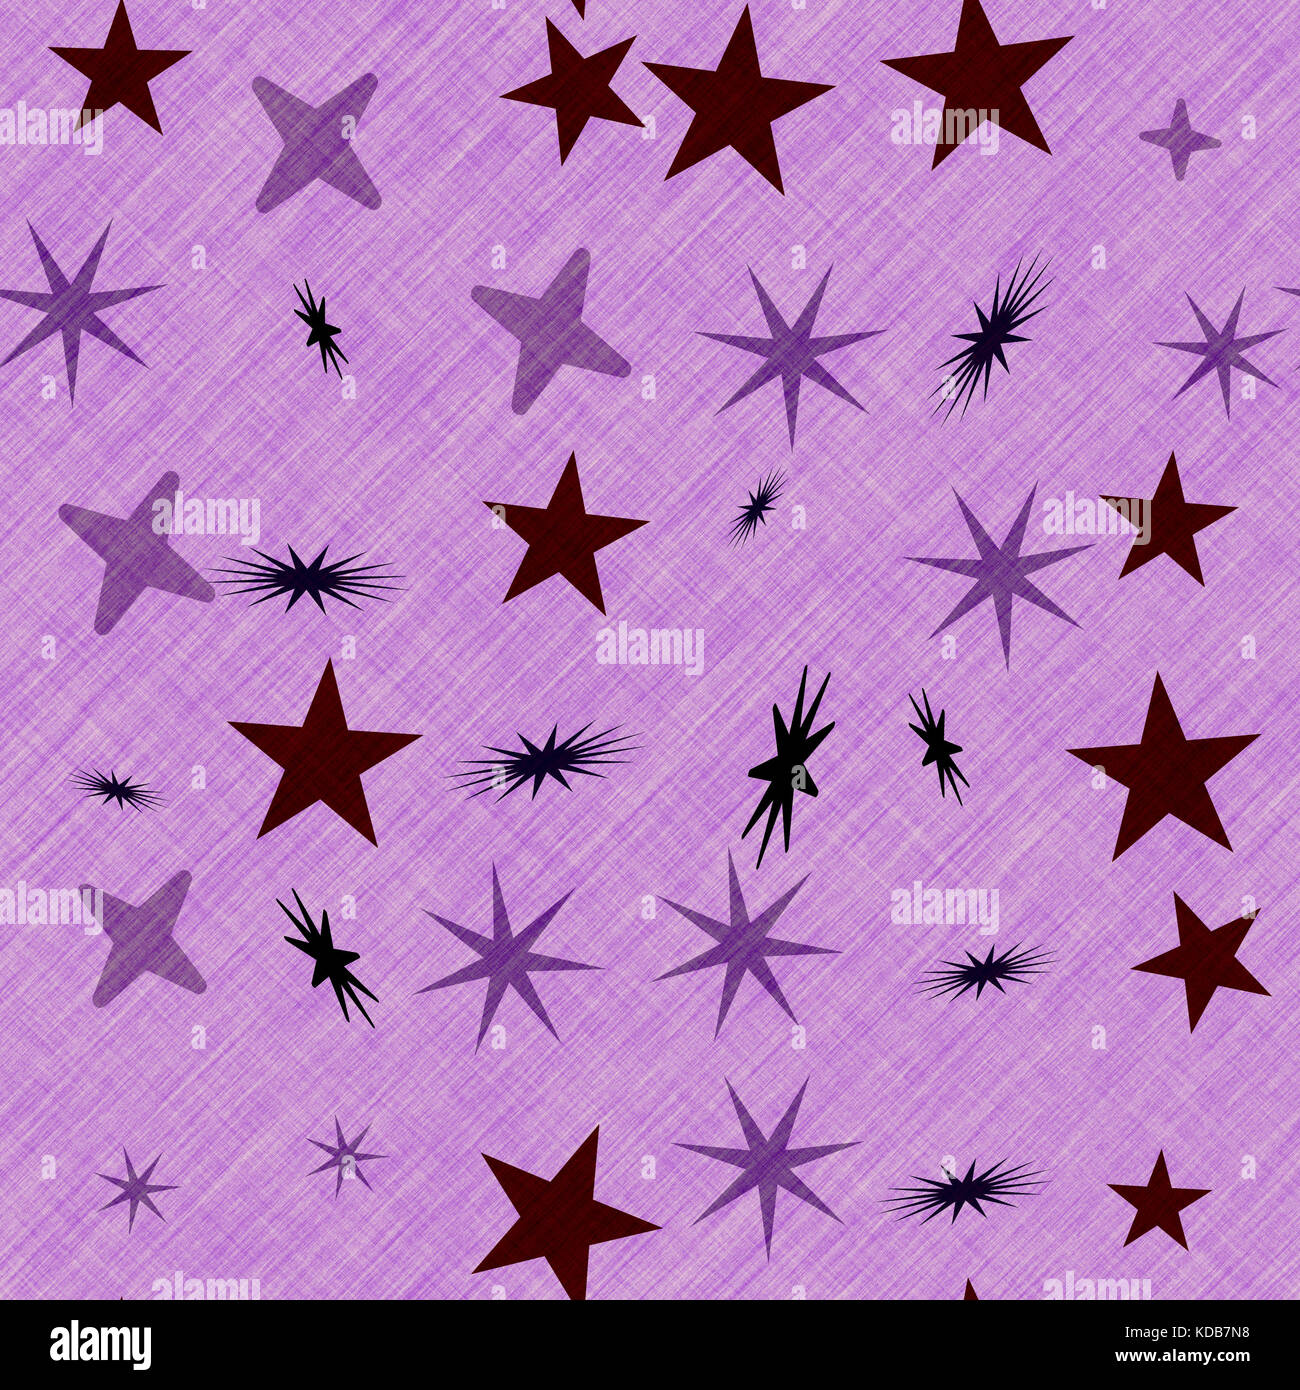 thin purple material with star prints Stock Photo